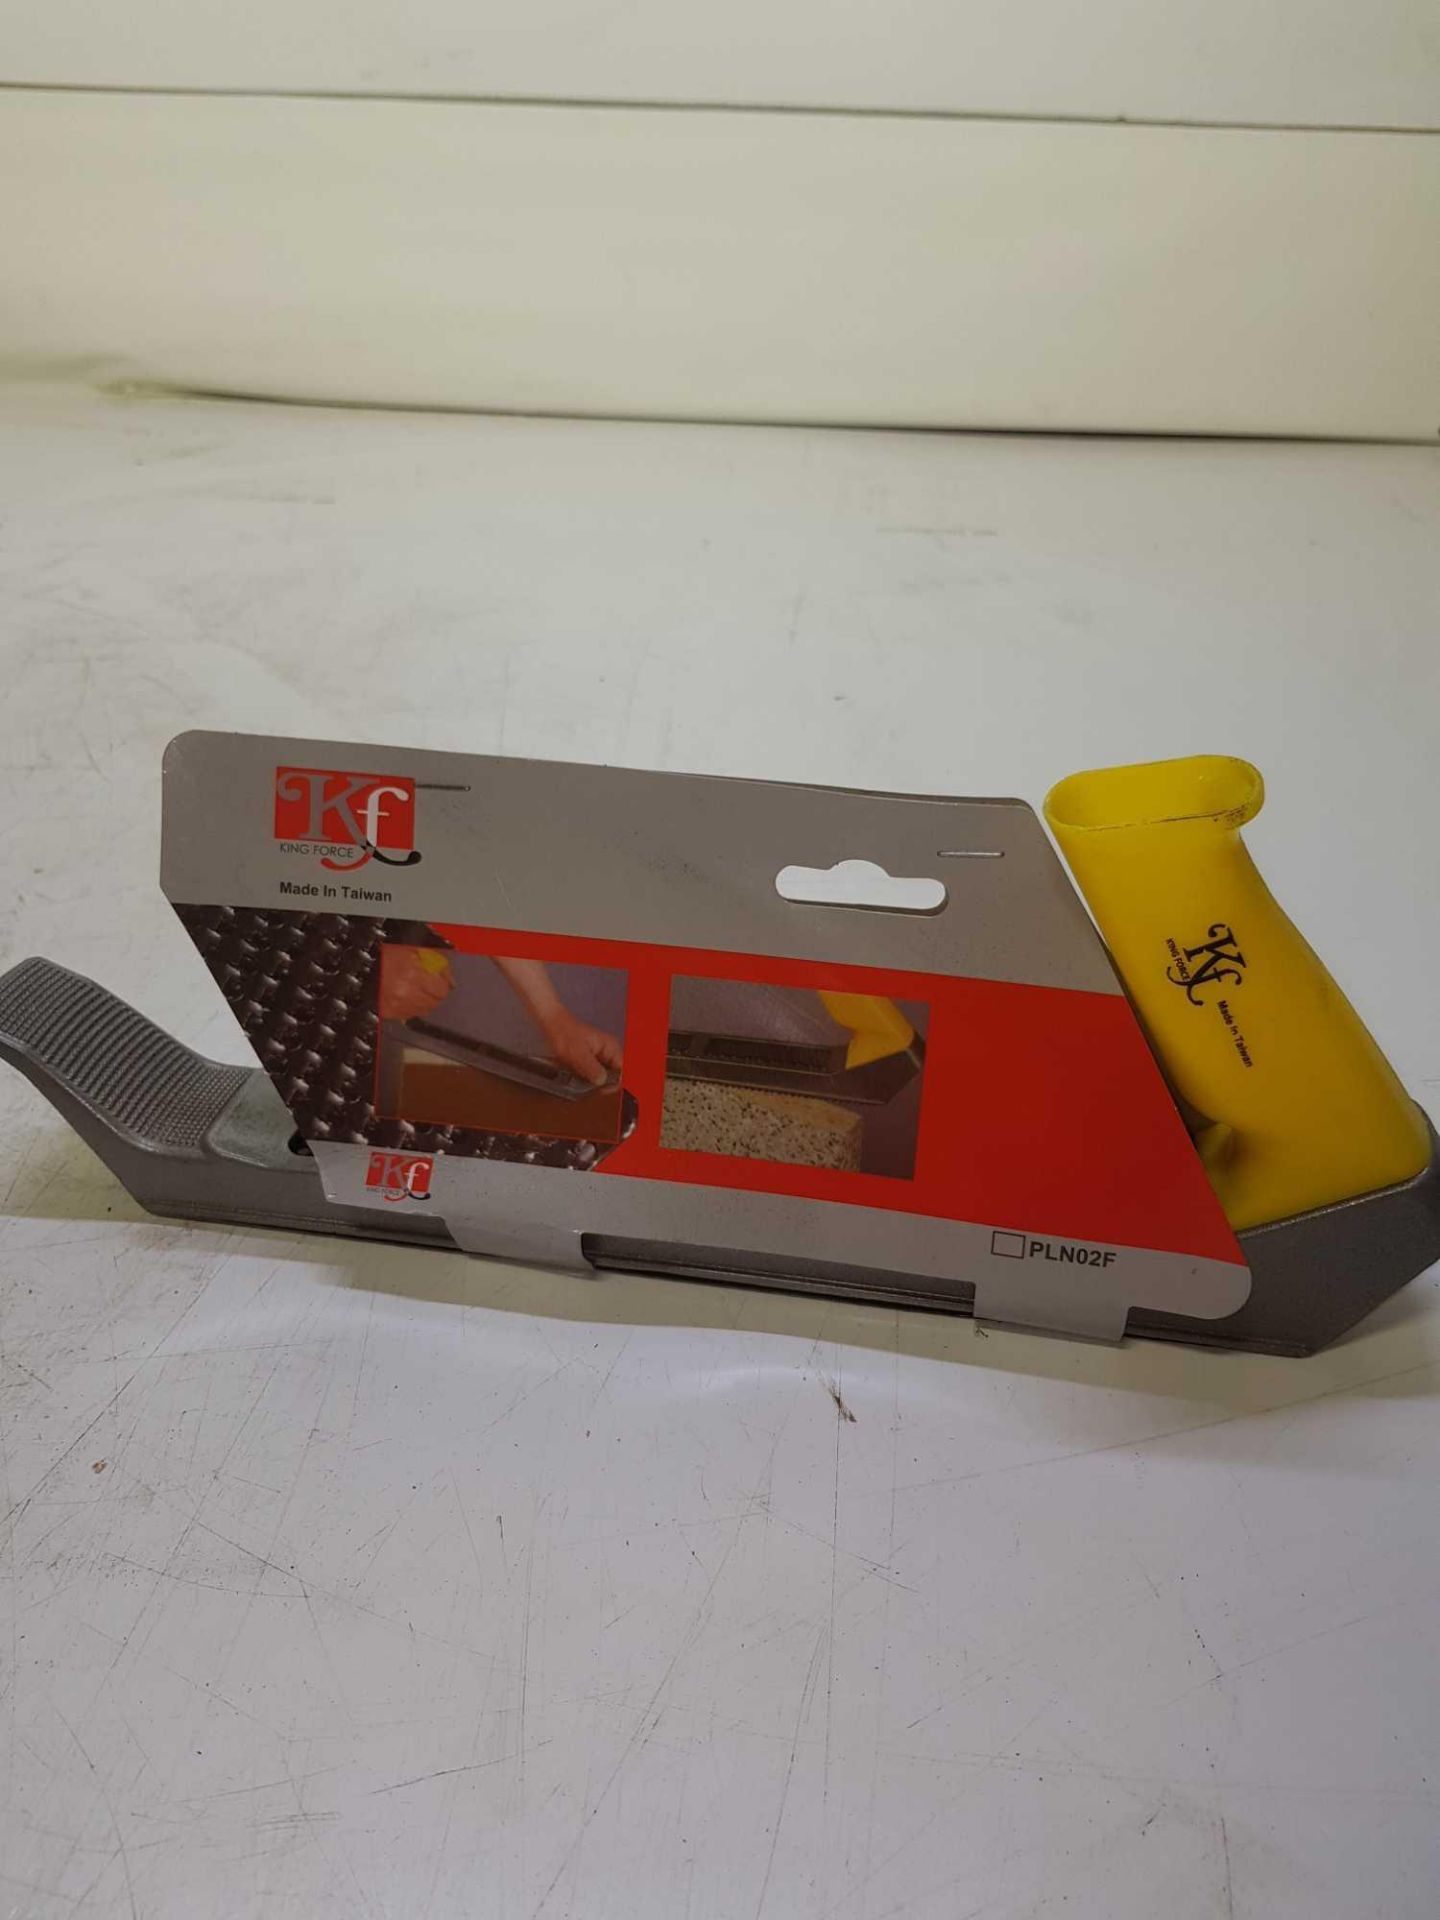 King force drywall planer